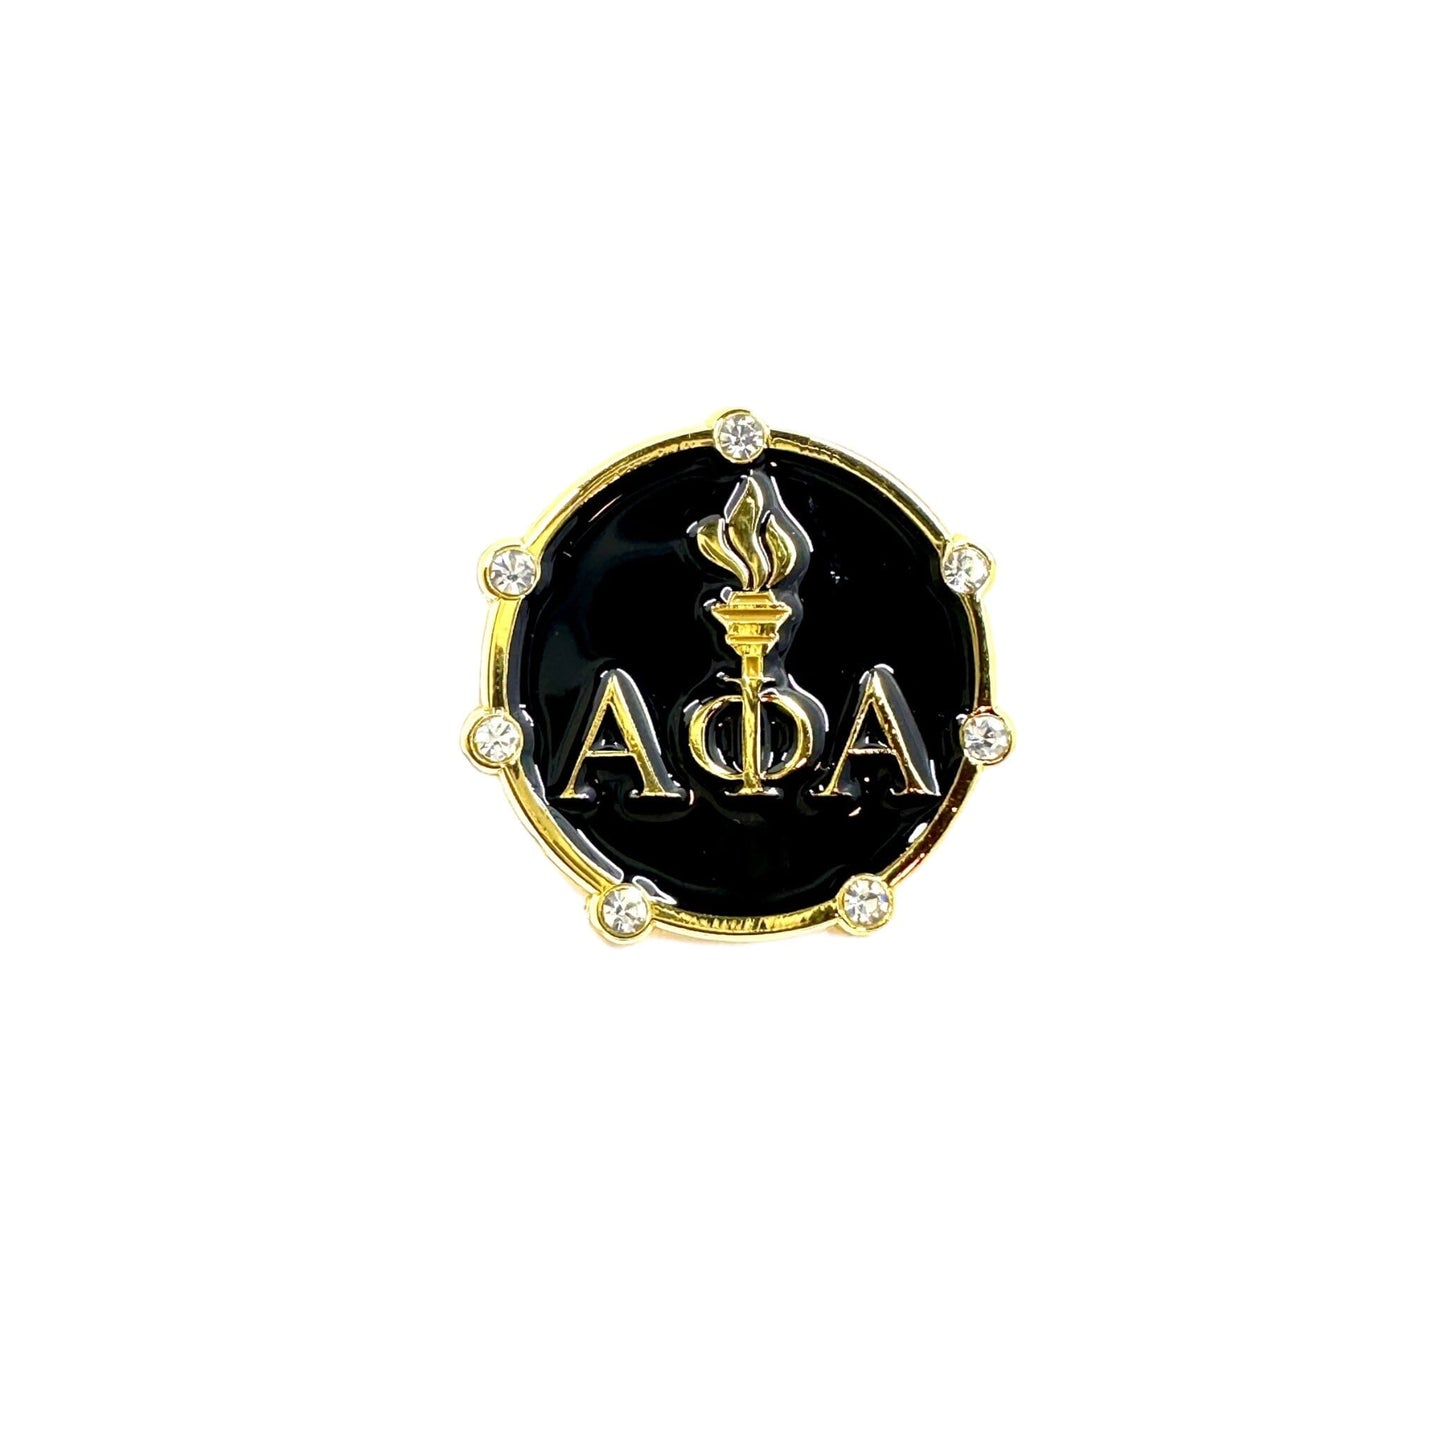 Alpha Phi Alpha Light Of The World custom lapel pin with gold-plated zinc alloy, black enamel coating, and seven diamonds representing the seven jewels of the fraternity, featuring a butterfly clutch for secure attachment.